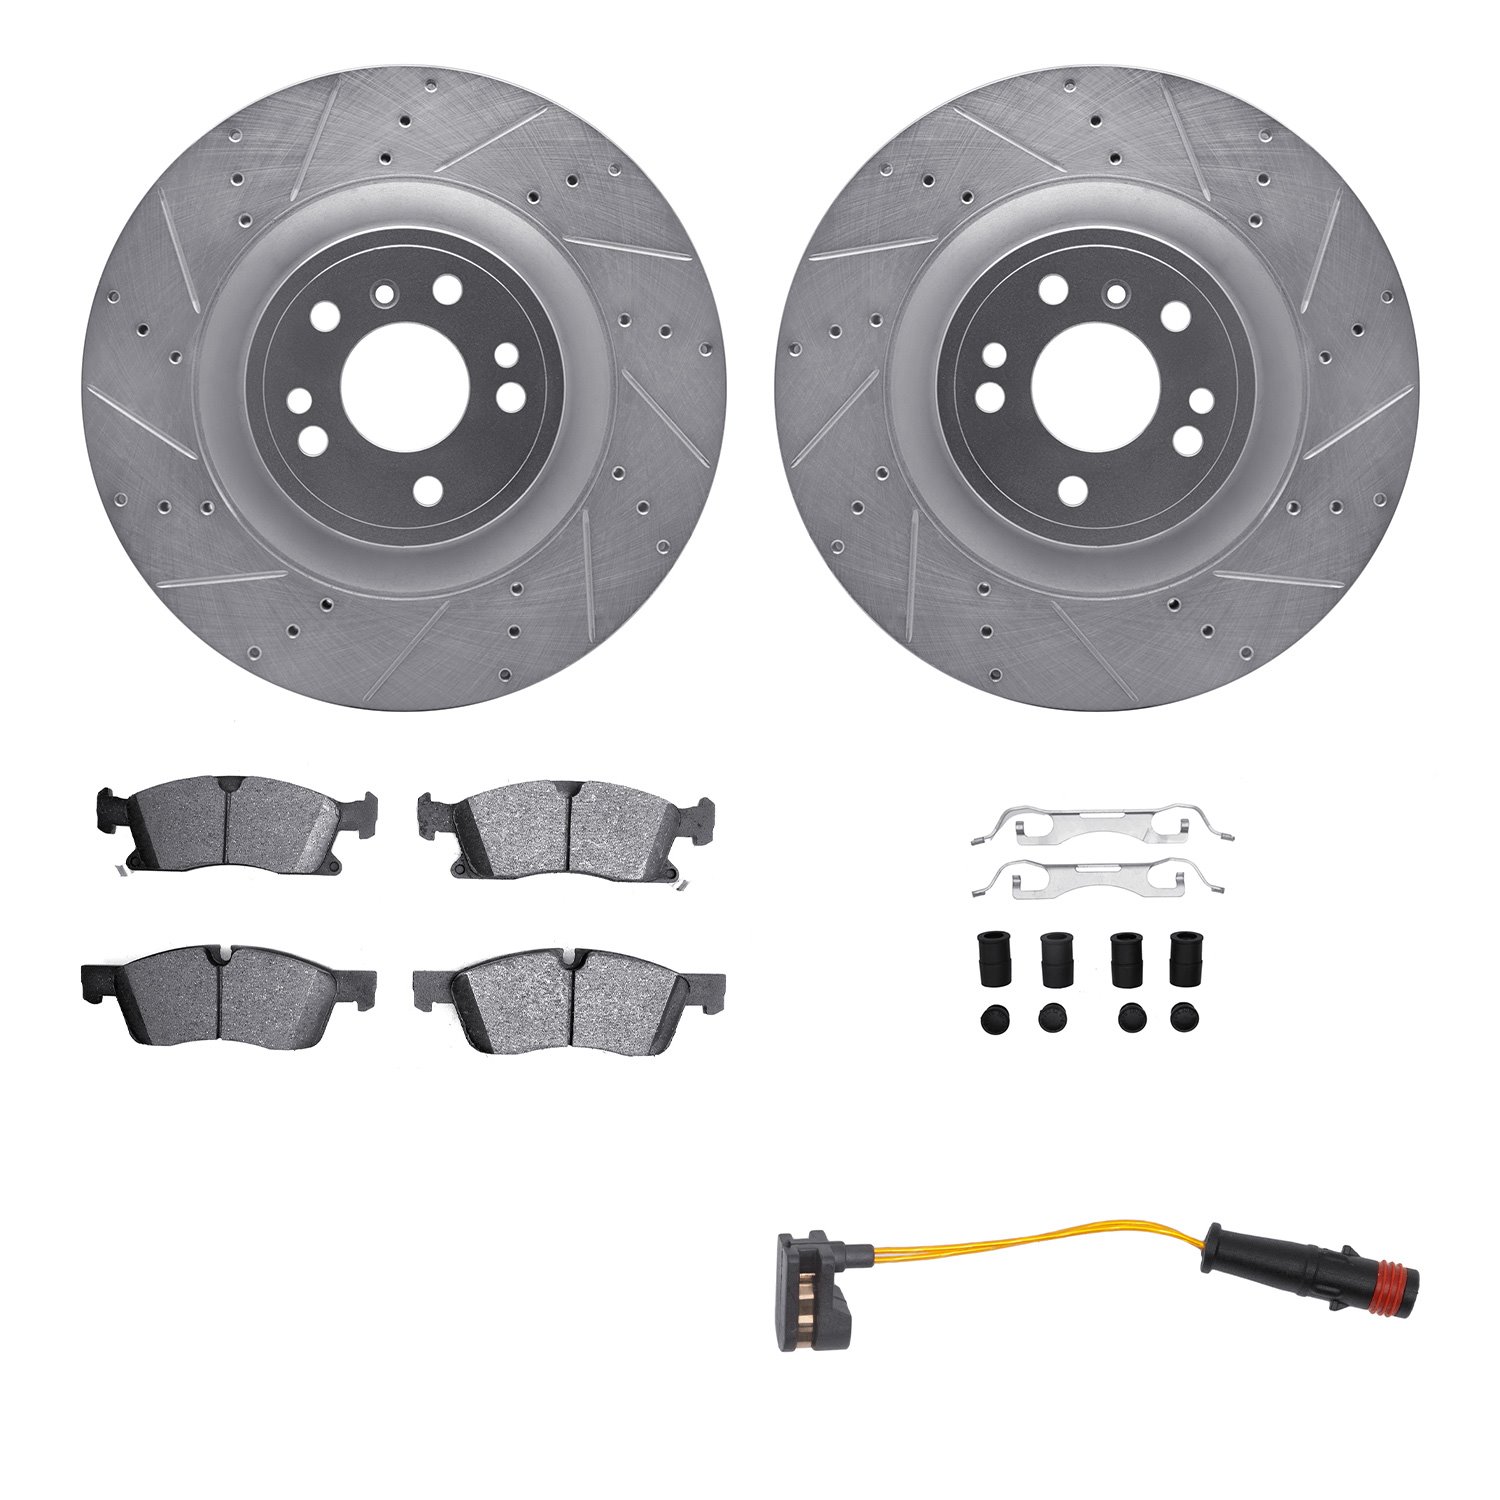 7422-63003 Drilled/Slotted Brake Rotors with Ultimate-Duty Brake Pads/Sensor & Hardware Kit [Silver], 2013-2019 Mercedes-Benz, P